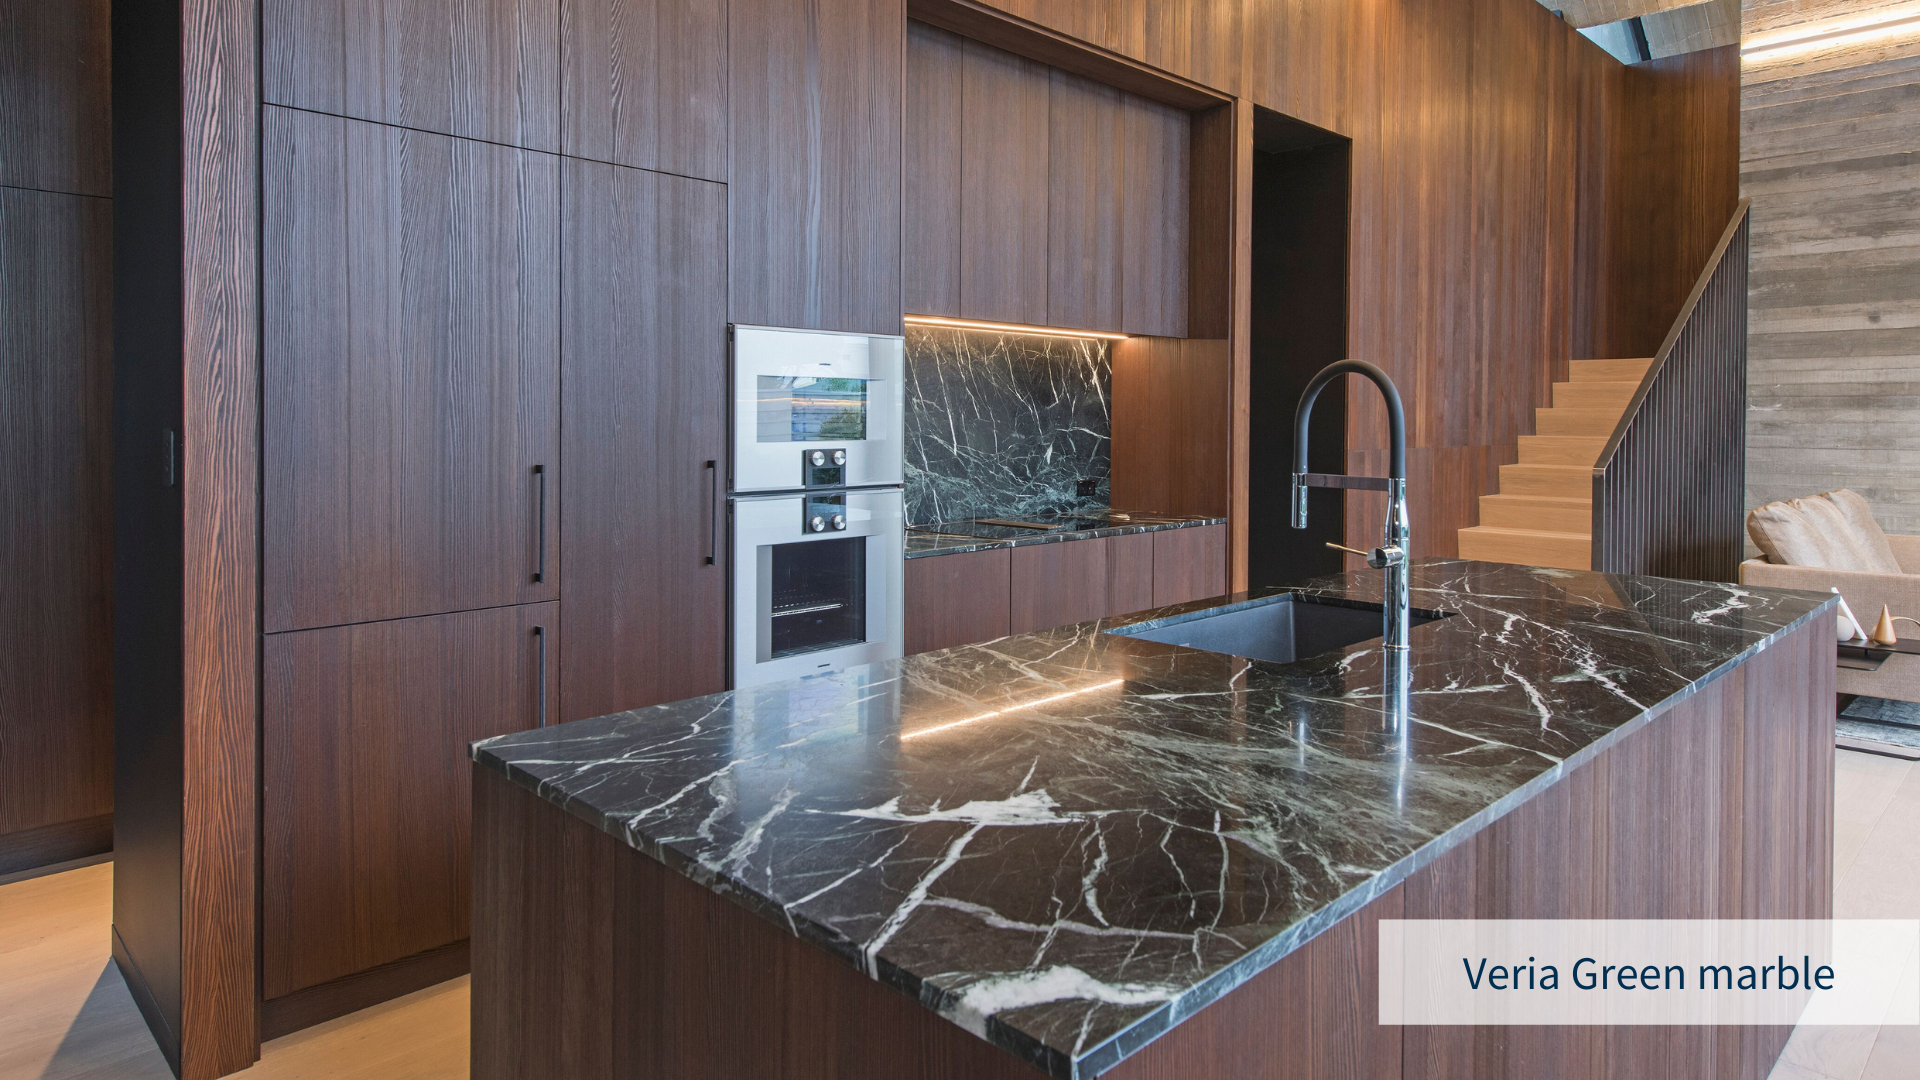 Luxurious kitchen rendering with veria green marble countertop and backsplash and dark wooden cabinets